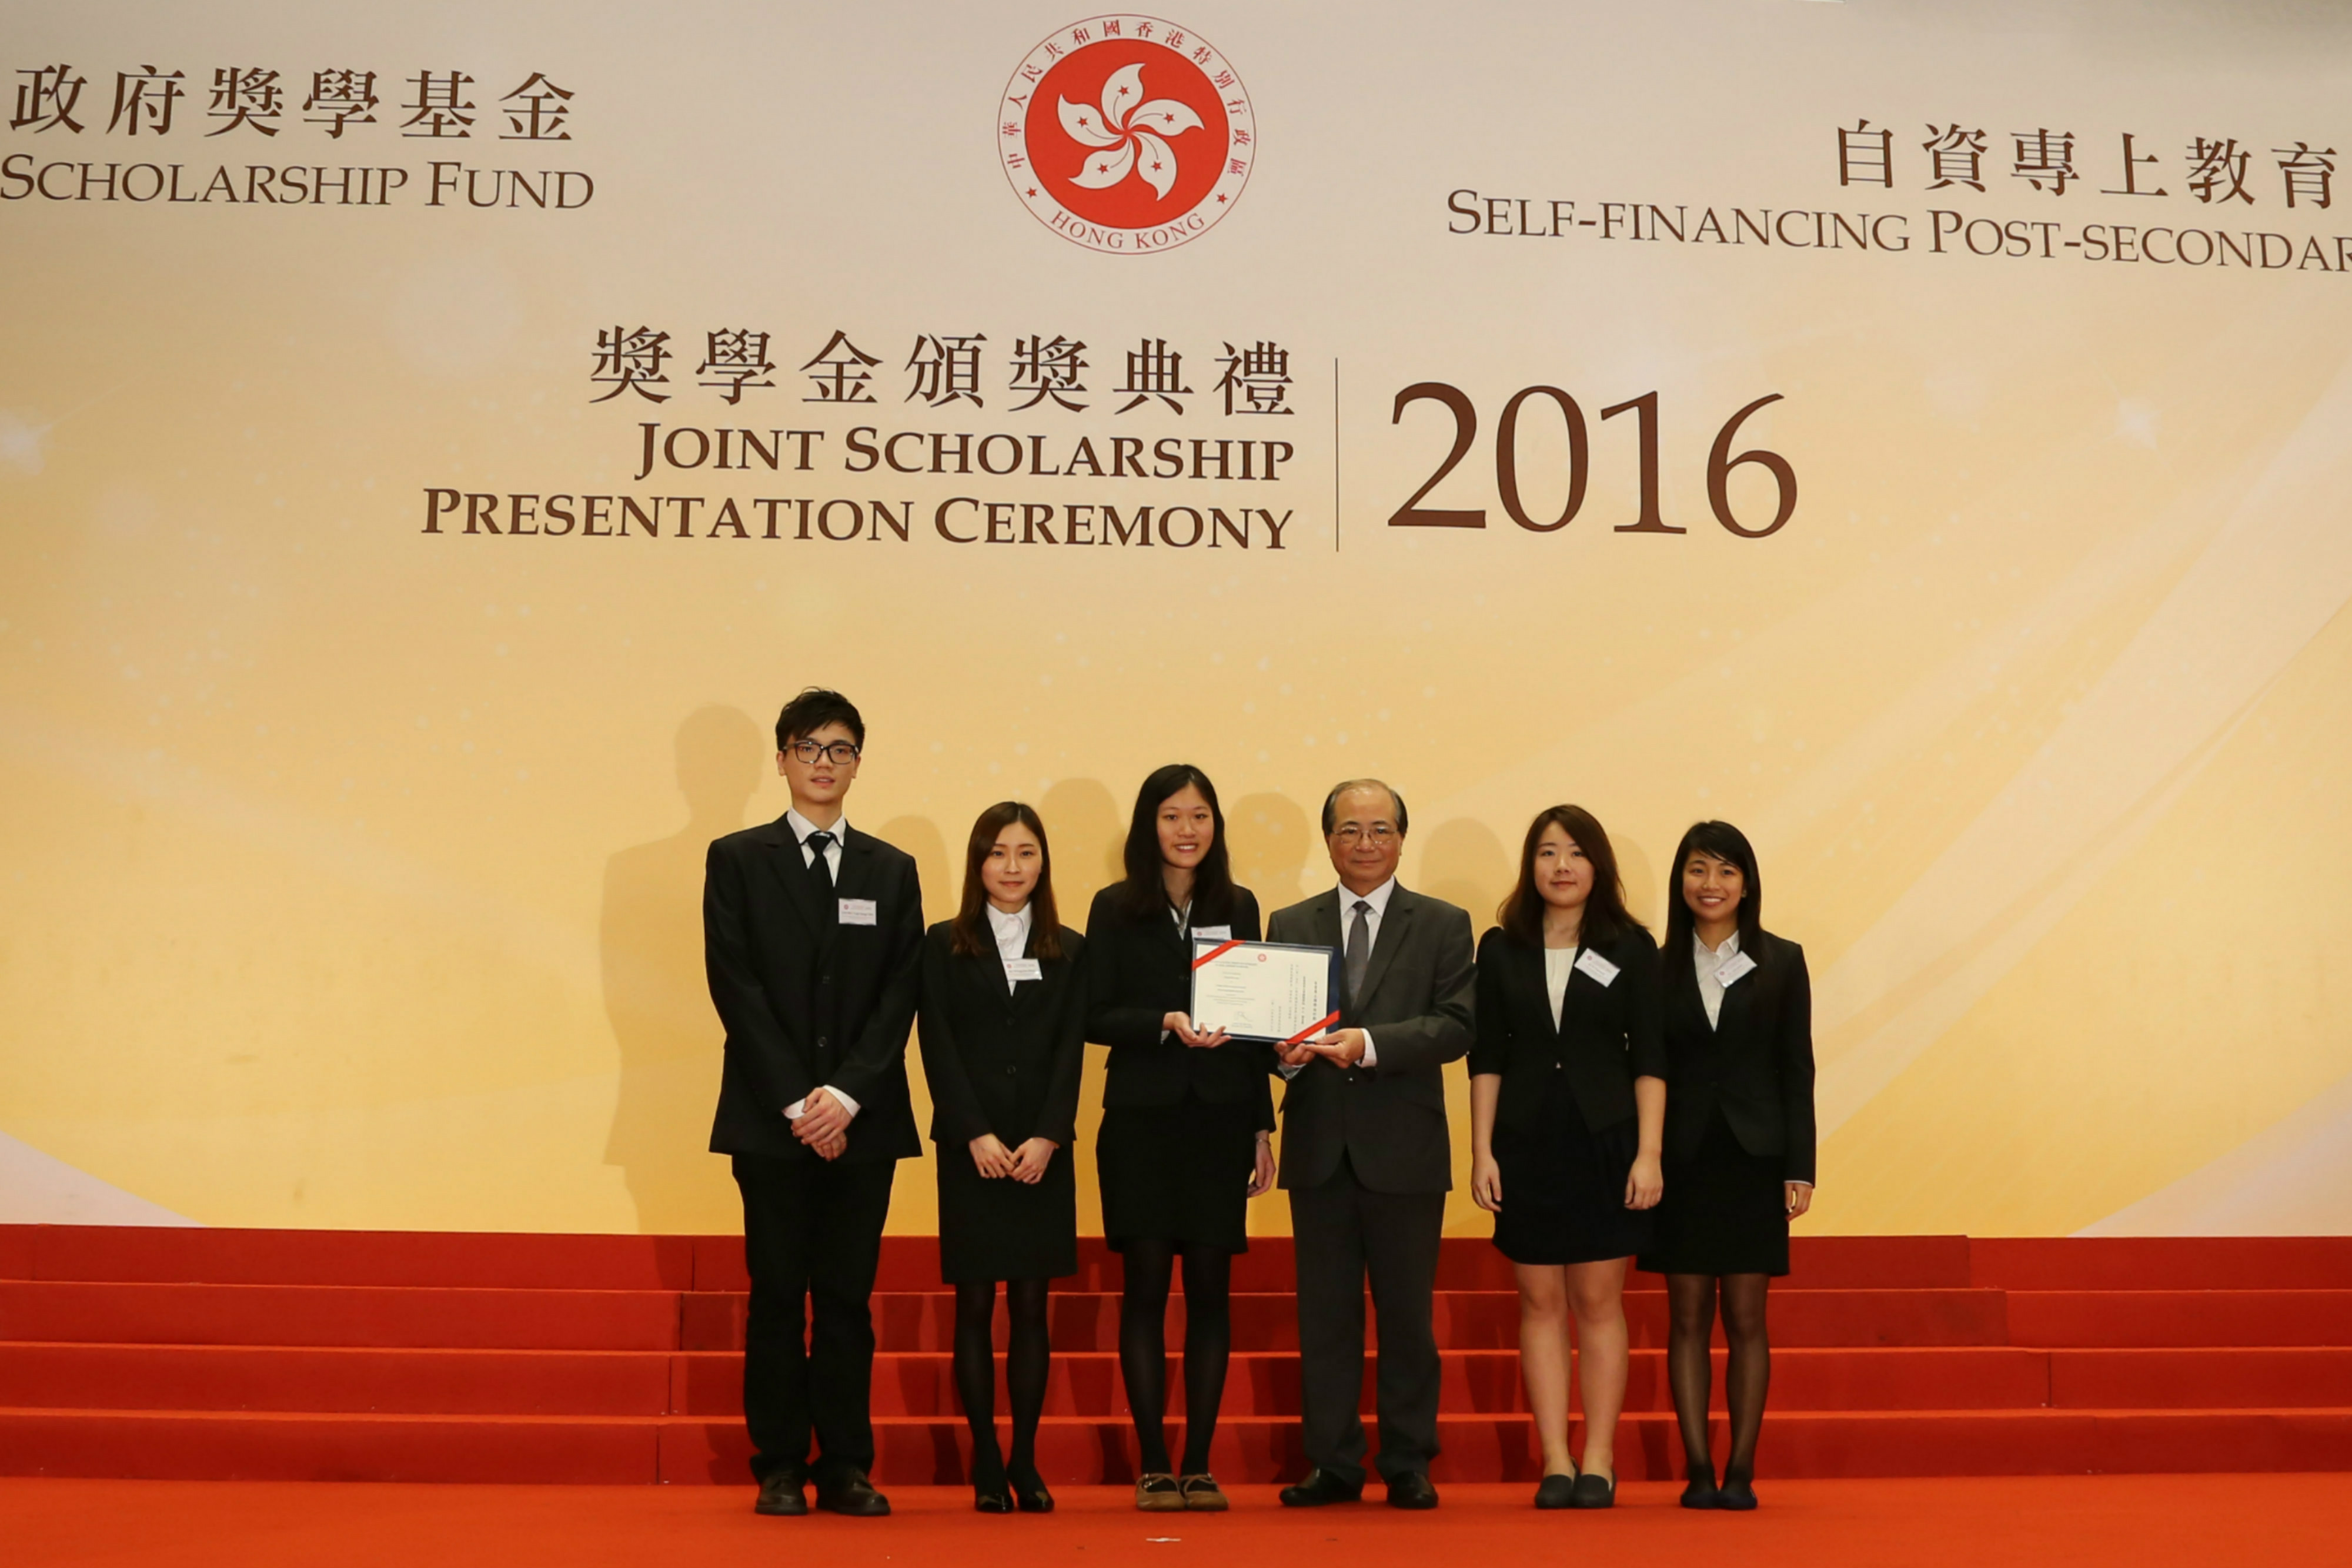 Mr. Eddie Ng Hak Kim, Secretary for Education (fourth from left), presenting a certificate to awardee representatives from CIE.